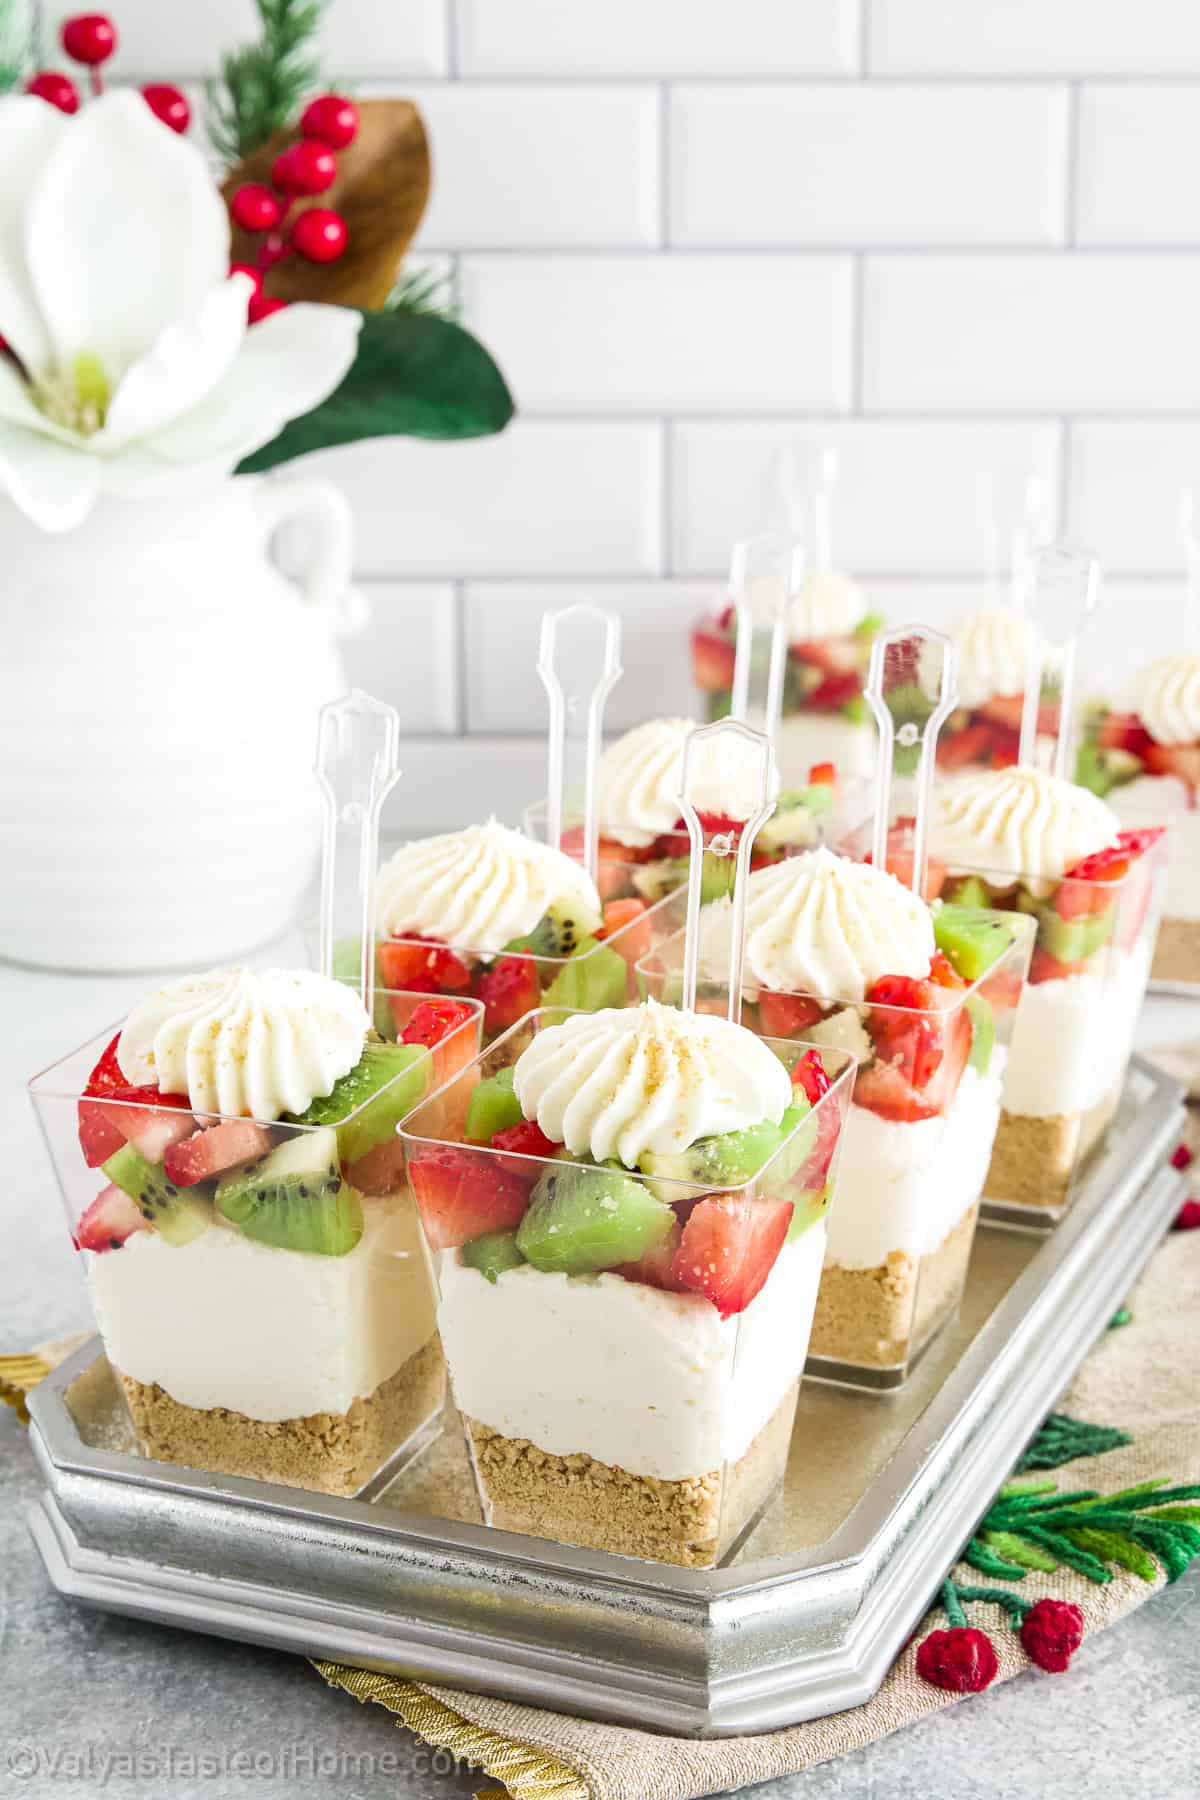 And this particular recipe is for Strawberry Kiwi Cheesecake Parfaits that have a delicious graham cracker crust layer, topped with a cheesecake filling, and topped with strawberries and kiwis.